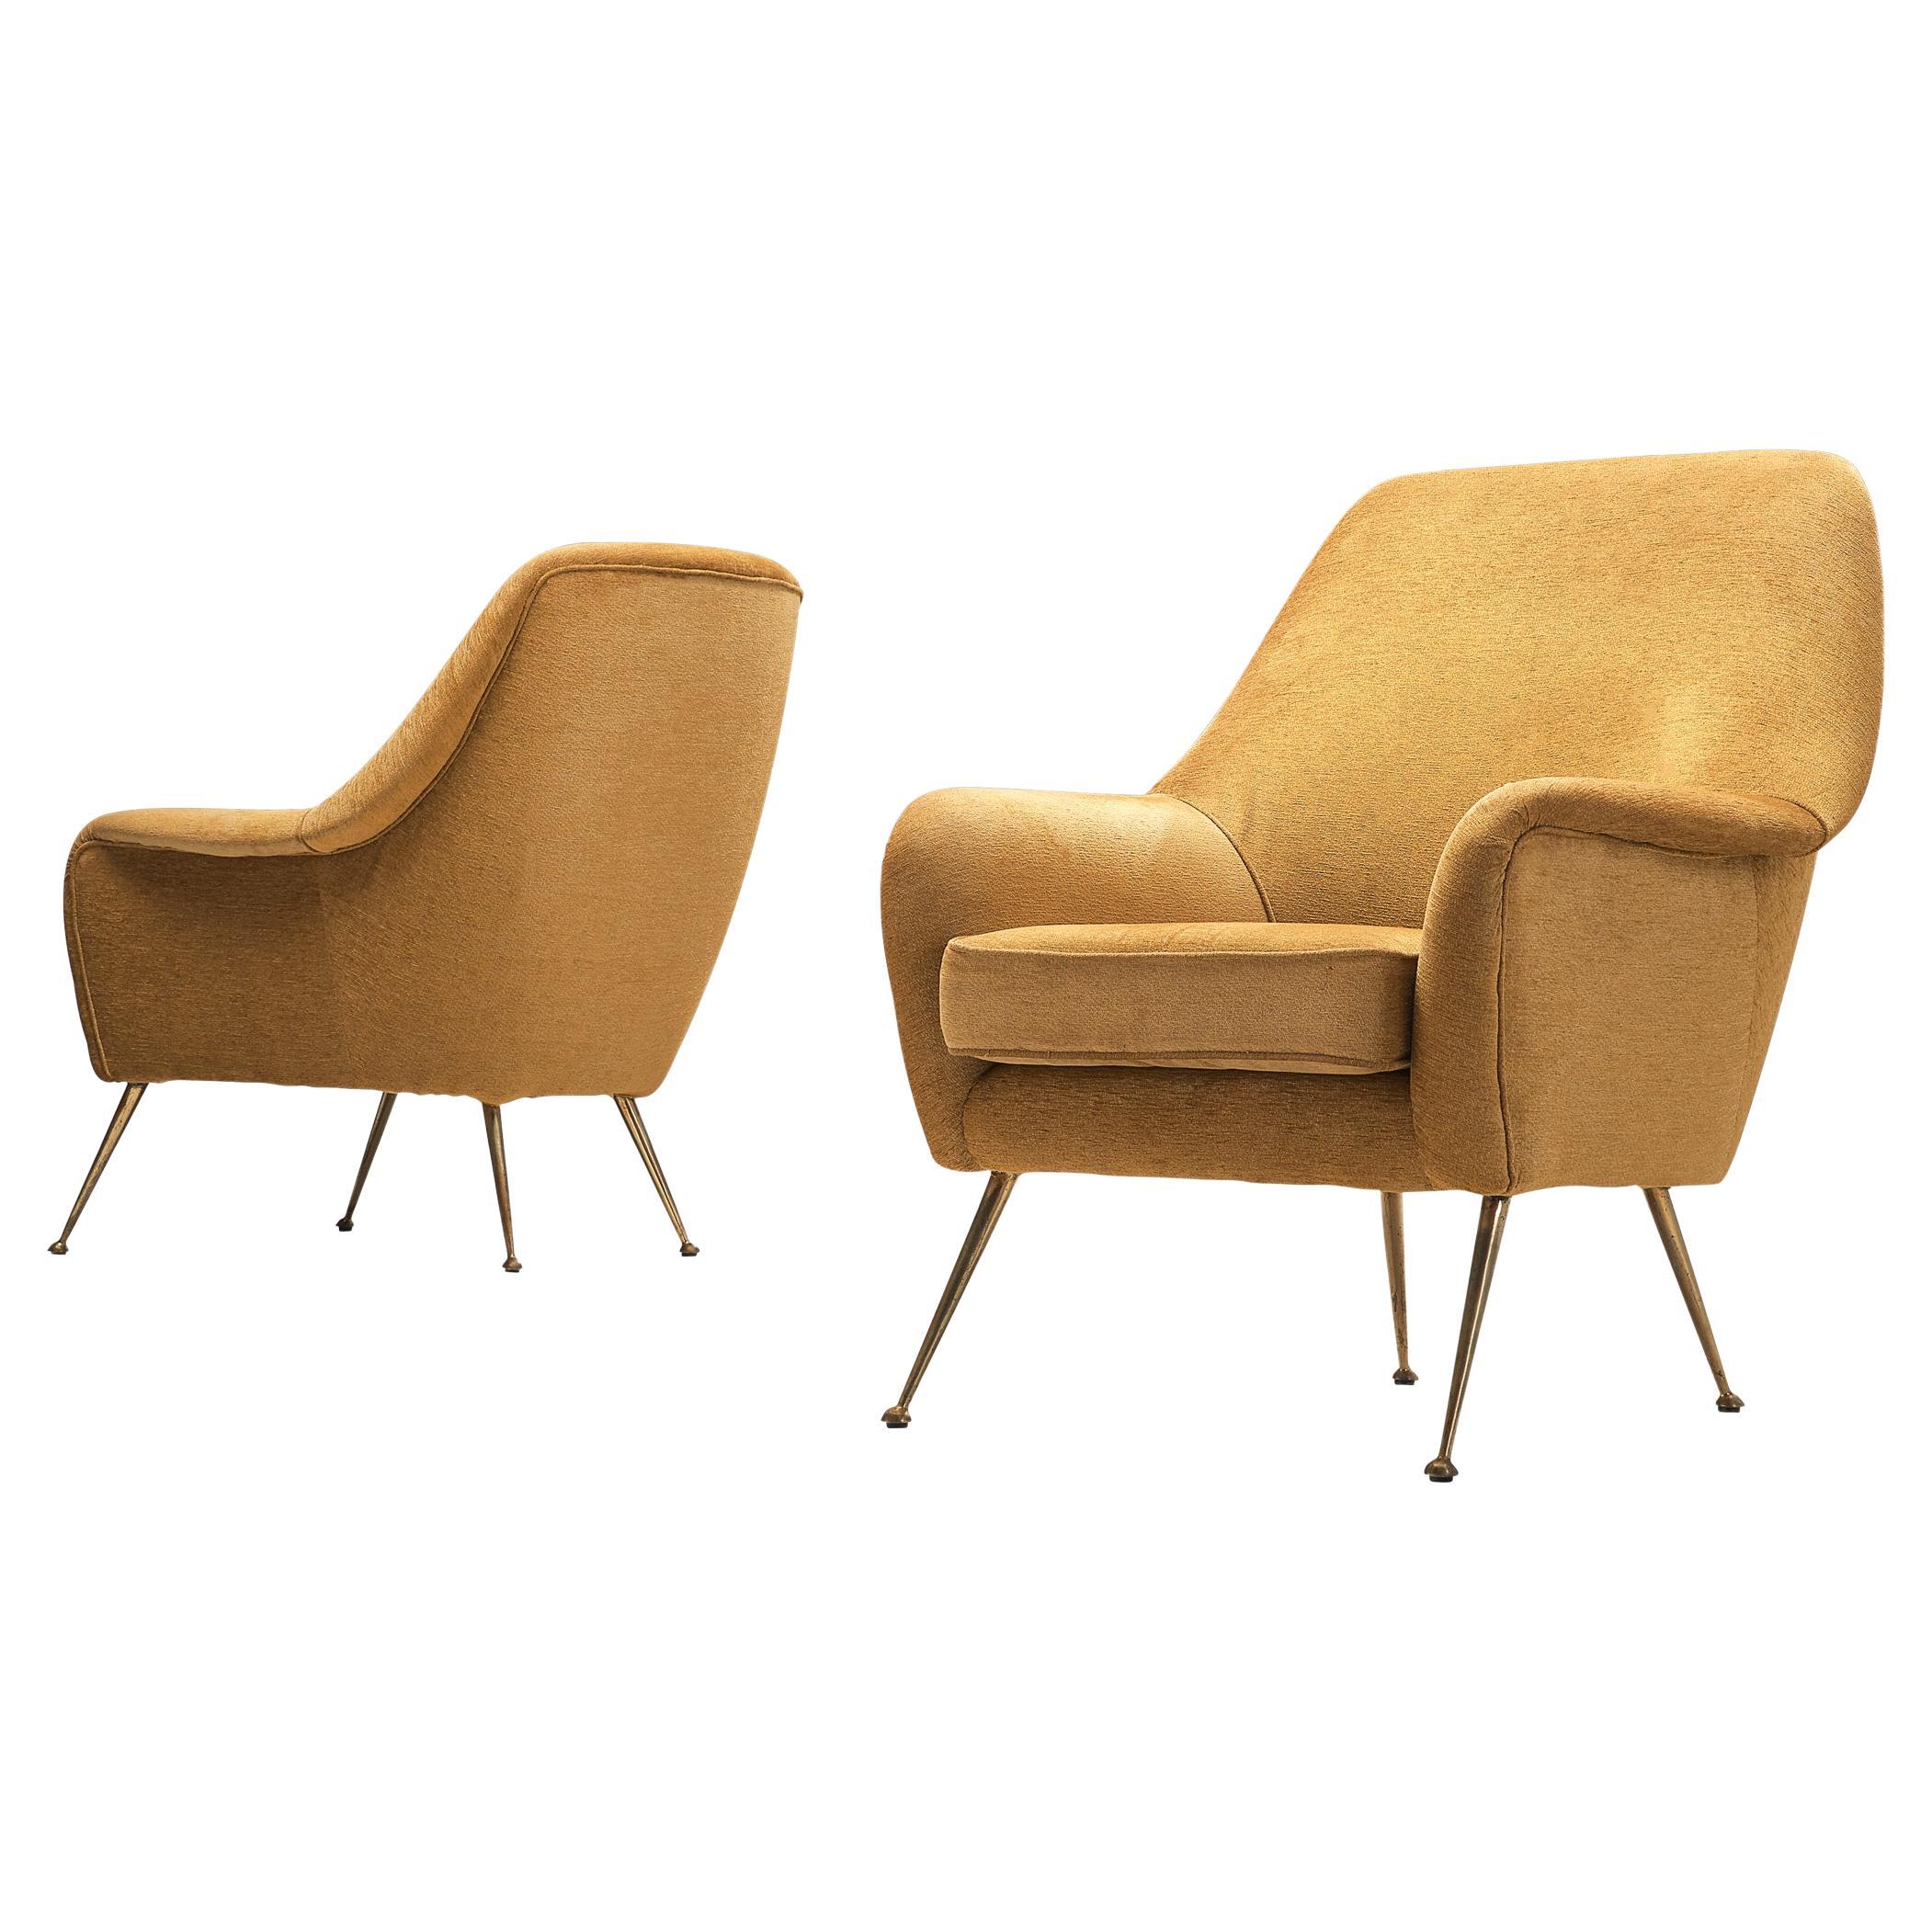 Pair of Elegant Italian Lounge Chairs in Brass and Beige Camel Upholstery  For Sale